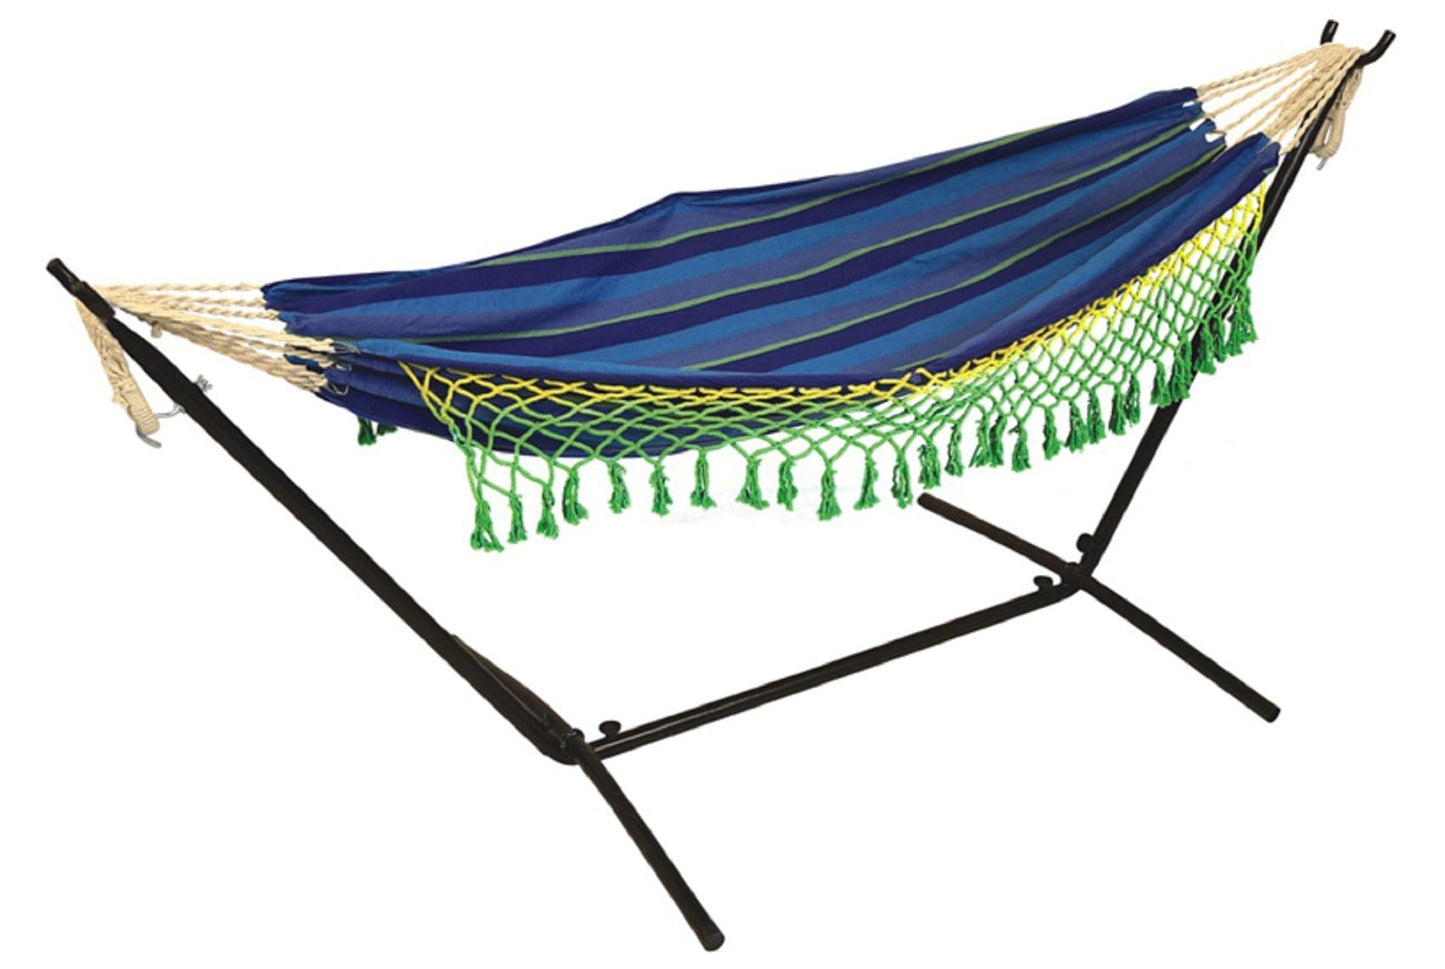 Double Canvas Hammock With 9ft Steel Hammock Stand - Ocean Blue, Weight capacity of 180kg